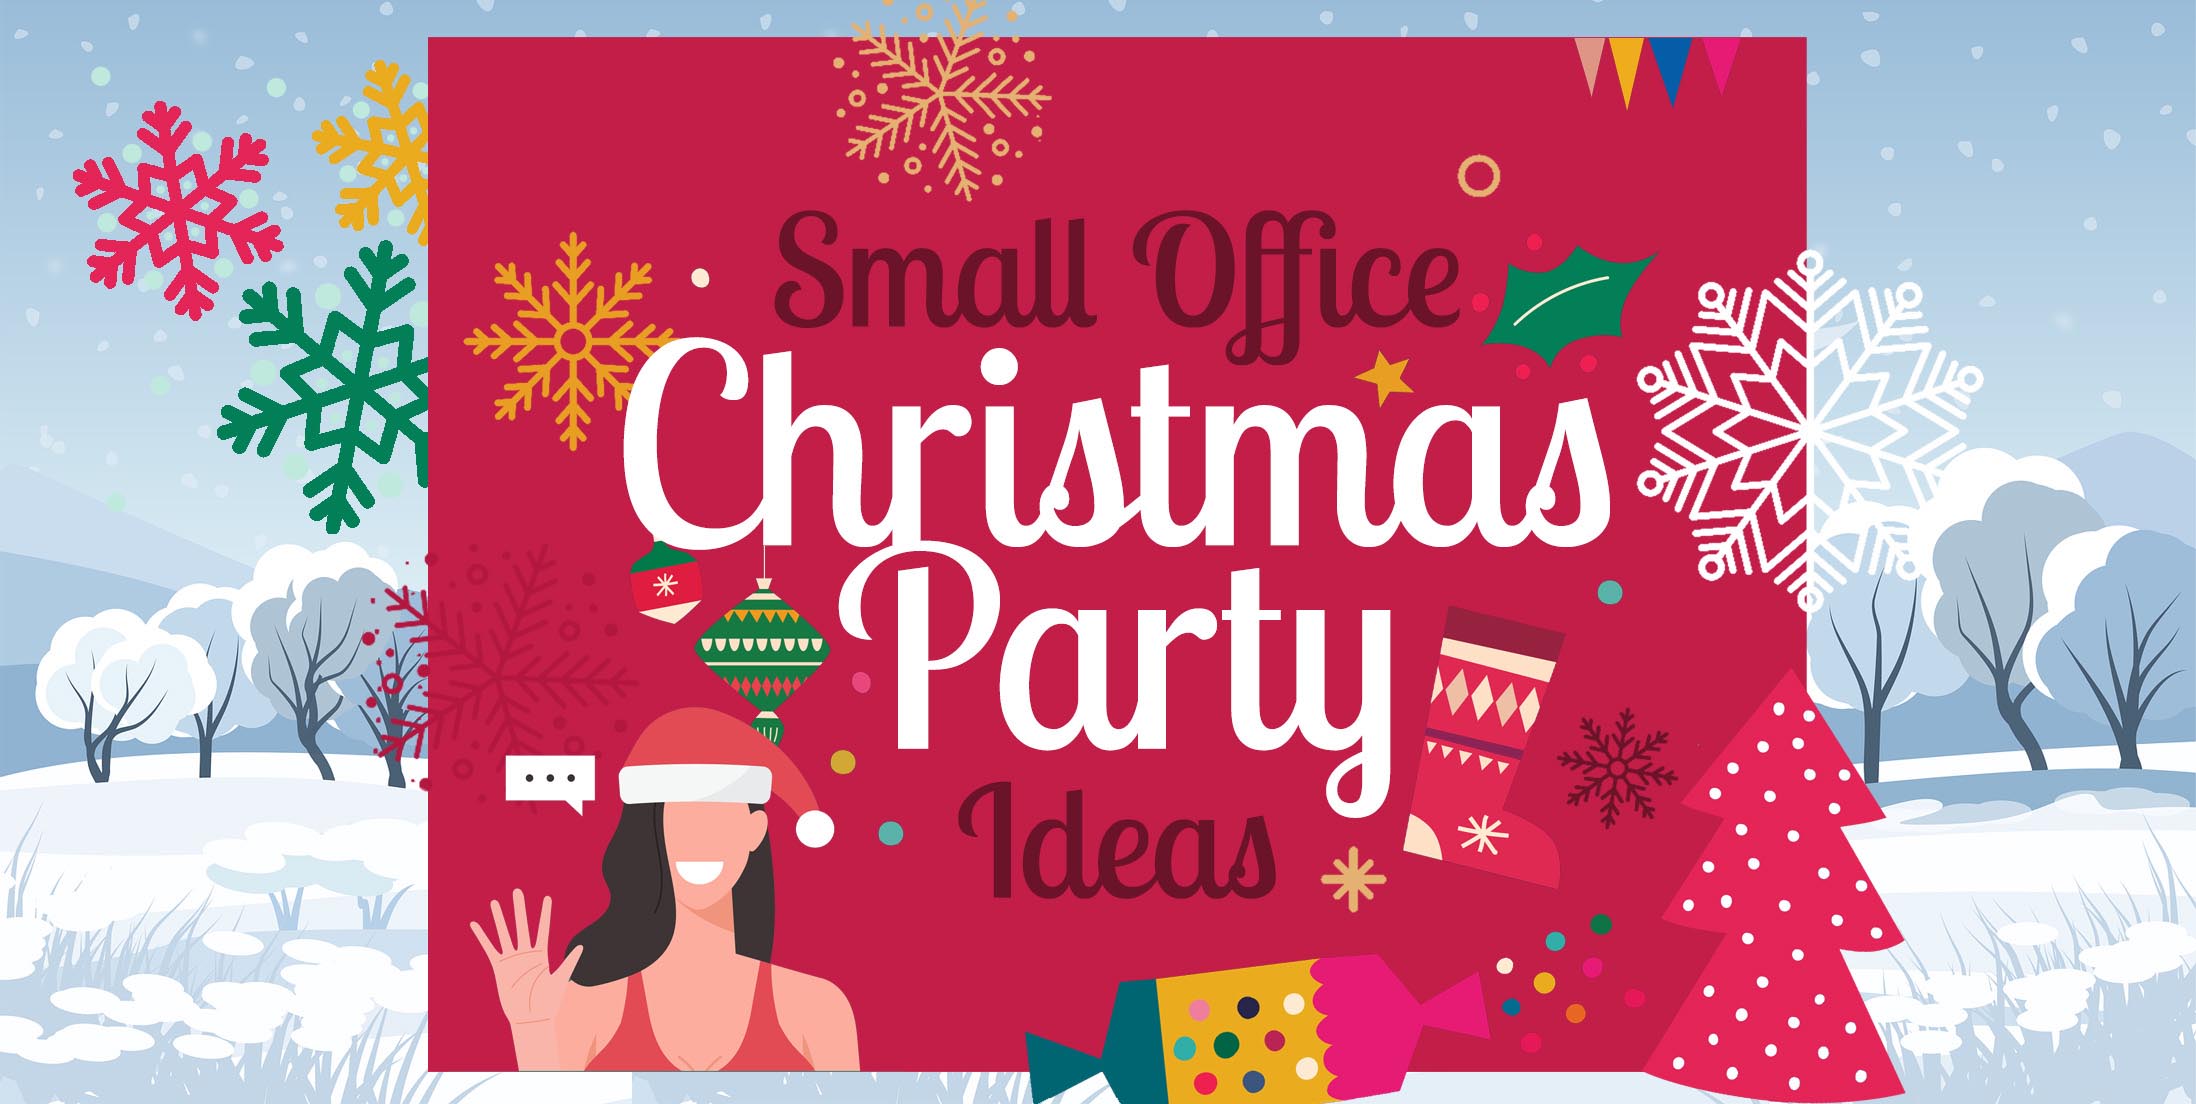 Small Office Christmas Party Ideas